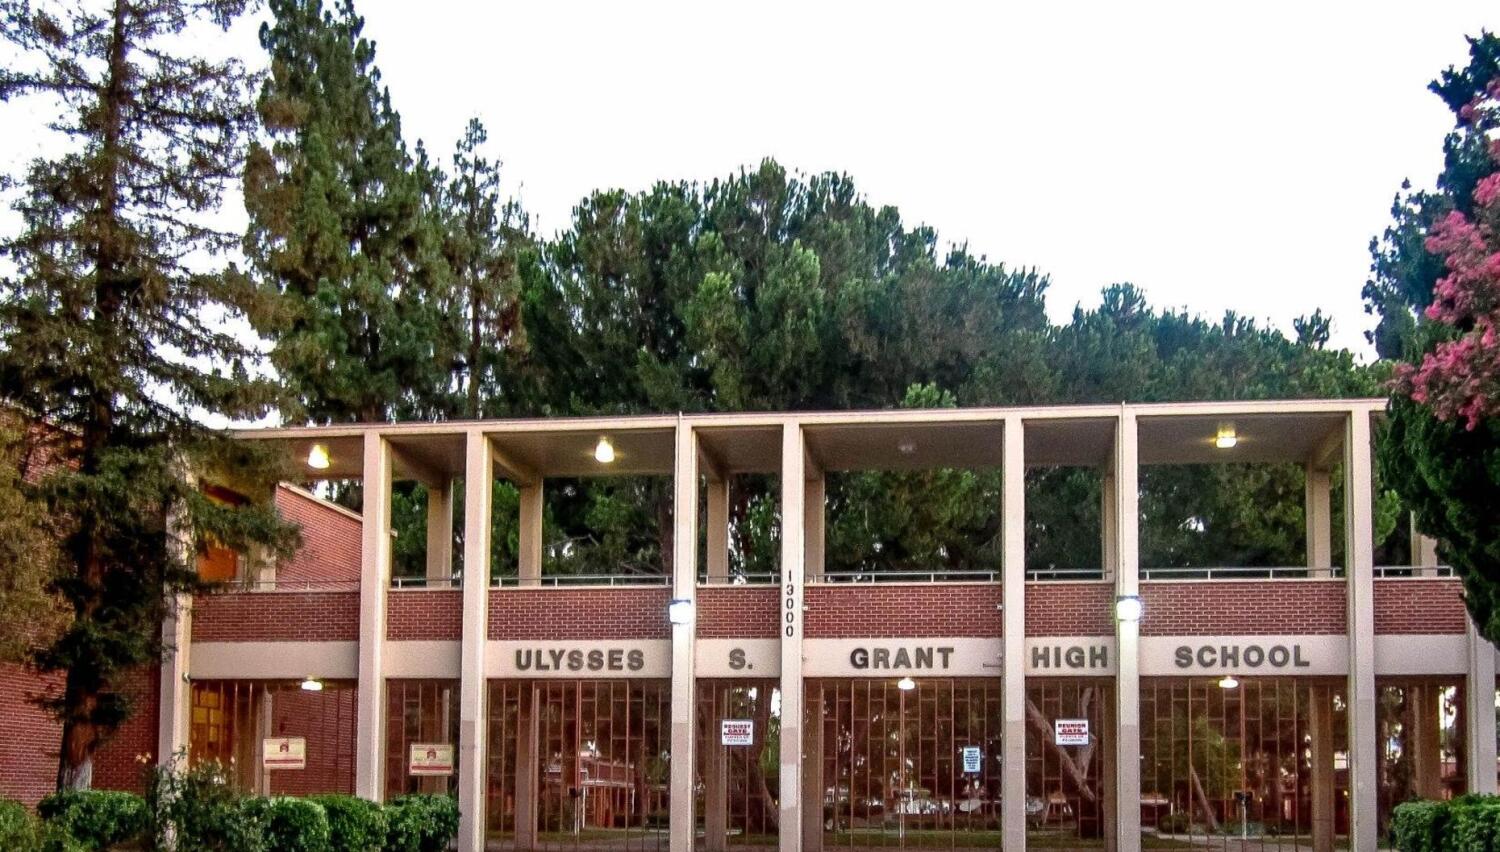 Student stabbed outside Grant High in third attack near L.A. campus since June